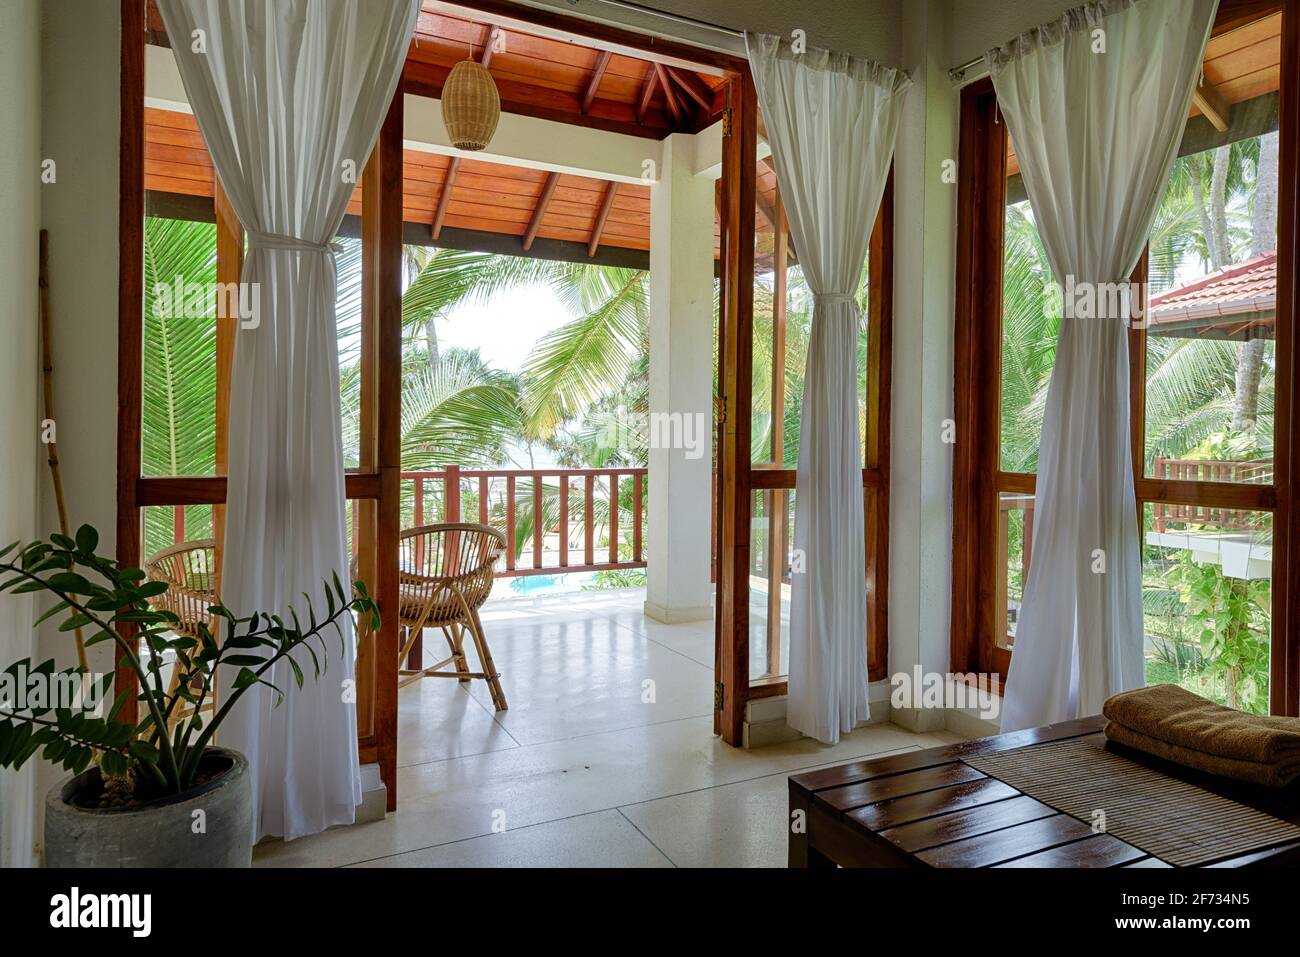 Tangalle, Sri Lanka - Nov 2, 2017: Hotel or residential house in tropical garden, room with terrace, windows and sea beach view. Home interior in Indi Stock Photo